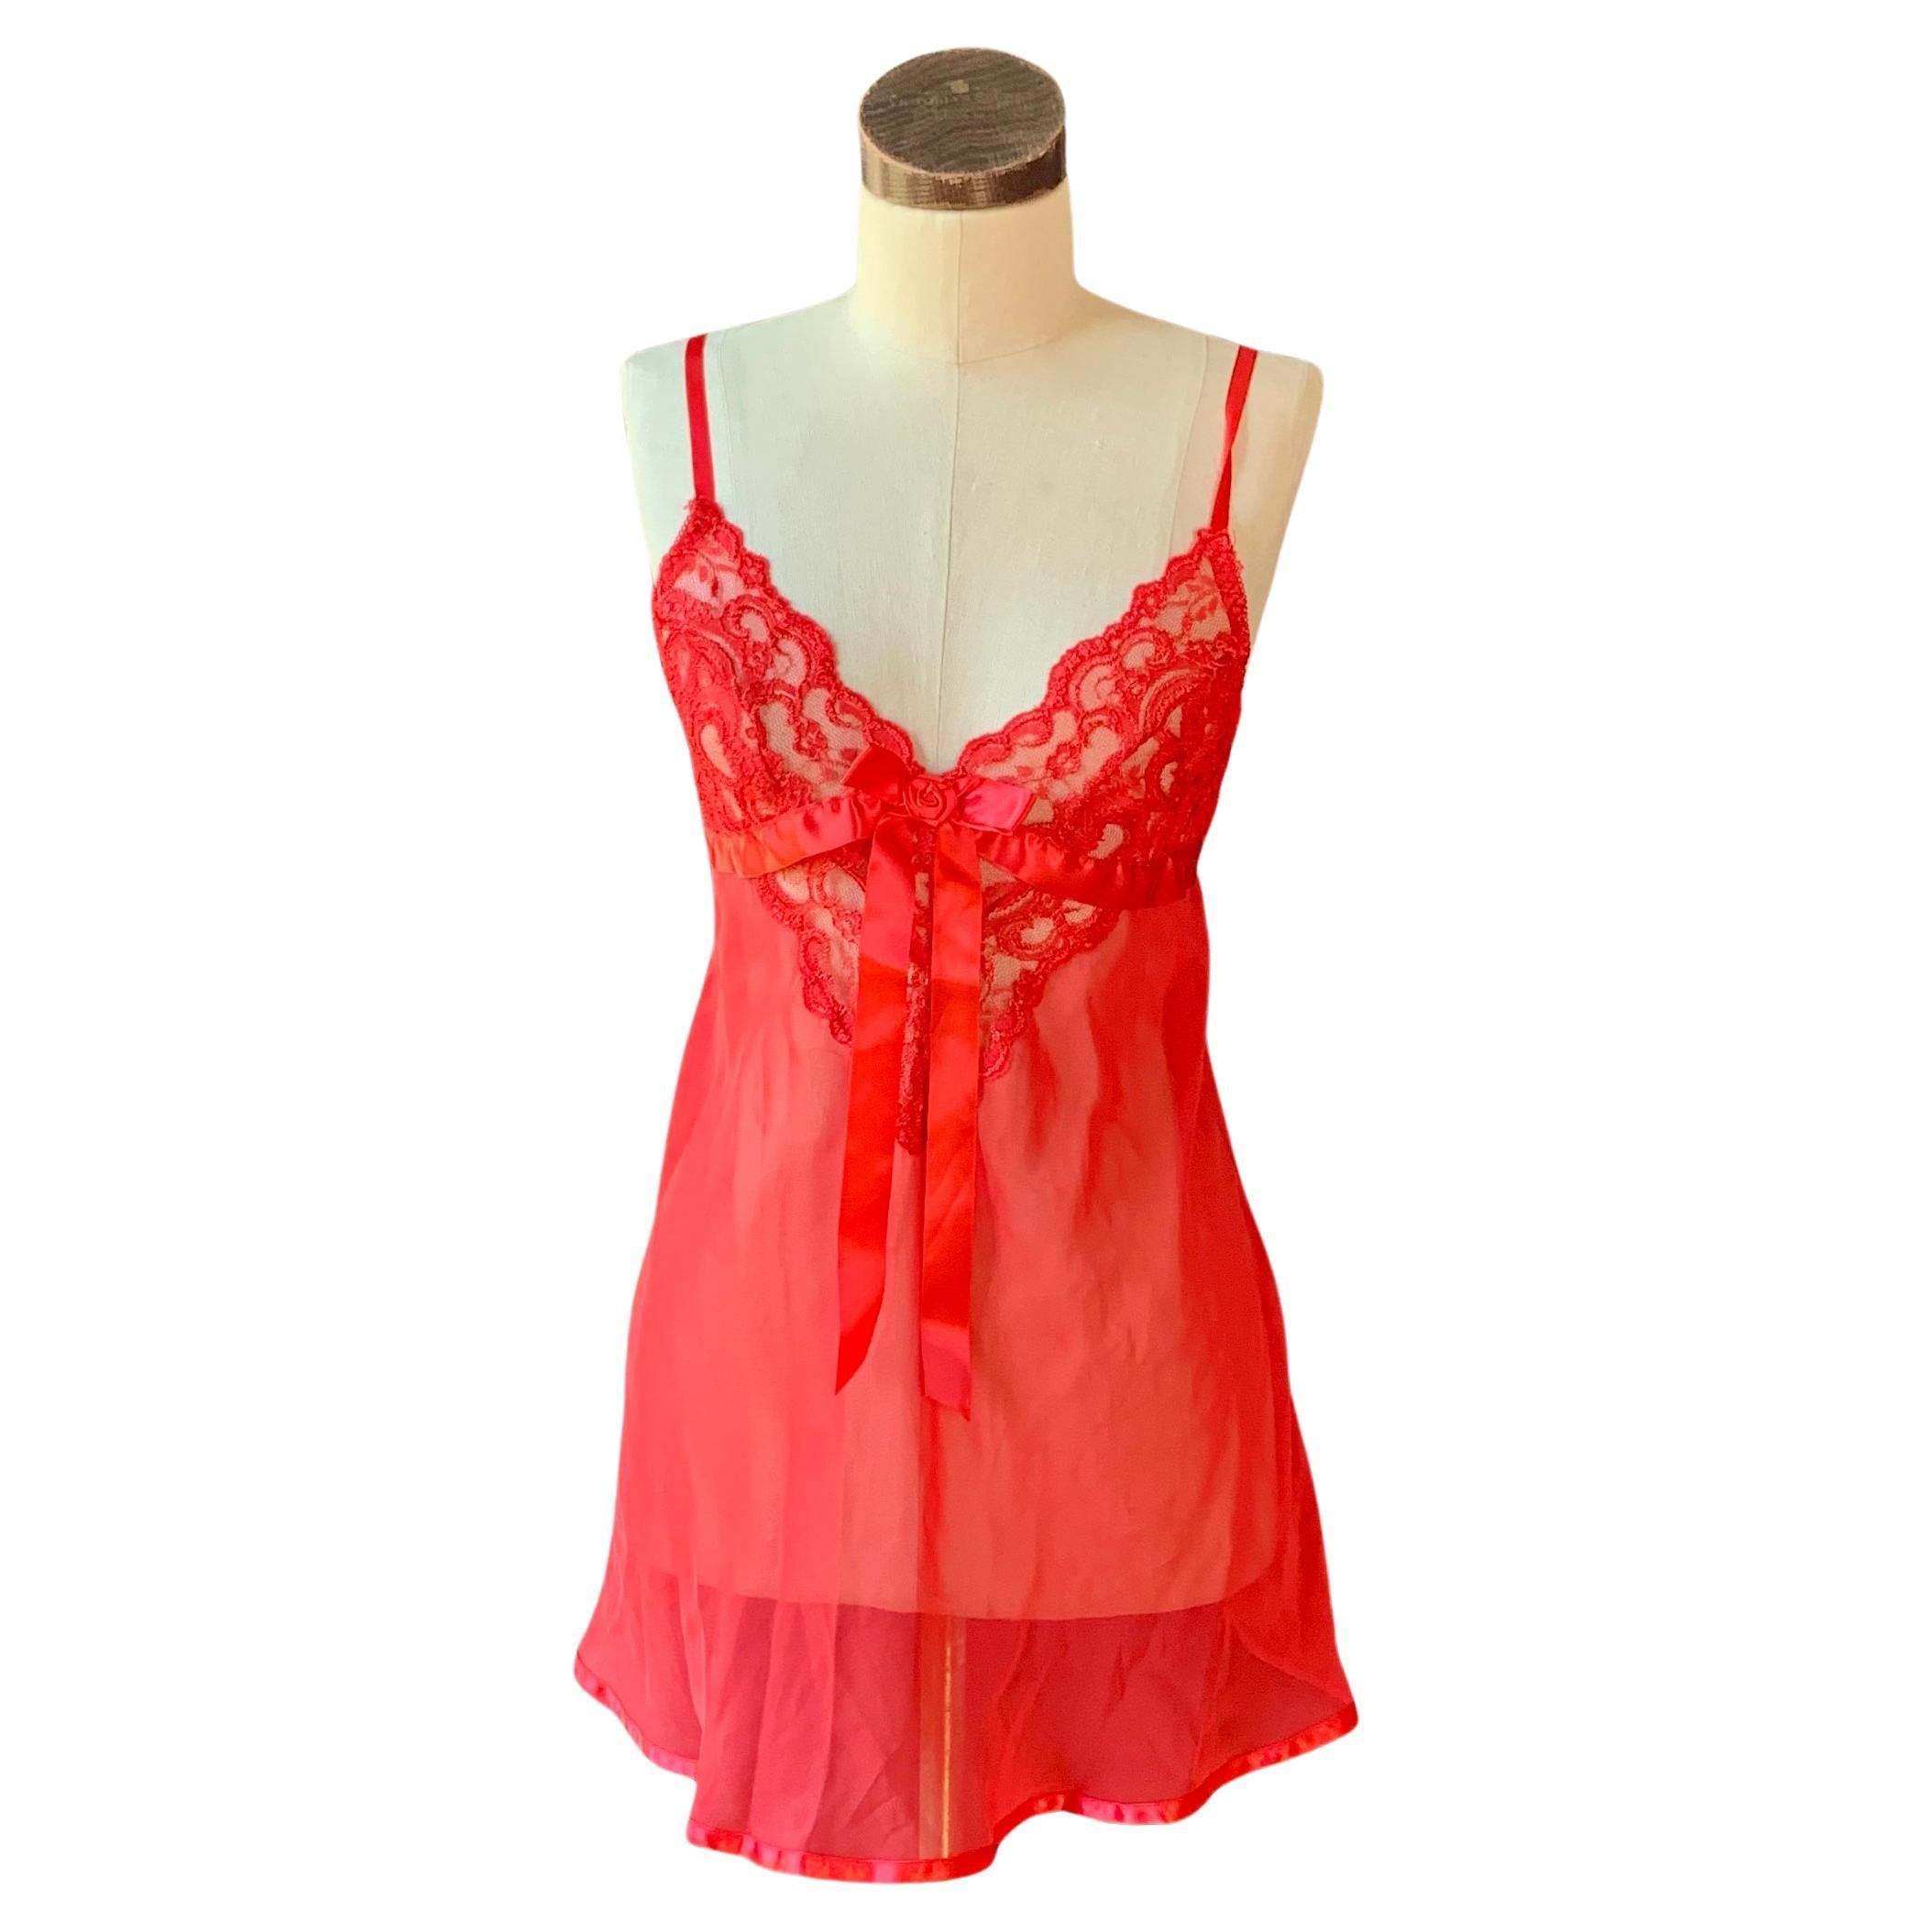 Vintage UNFORGETTABLE Babydoll Nightie SEXY Nightgown Red Lace Bow SATIN Small For Sale